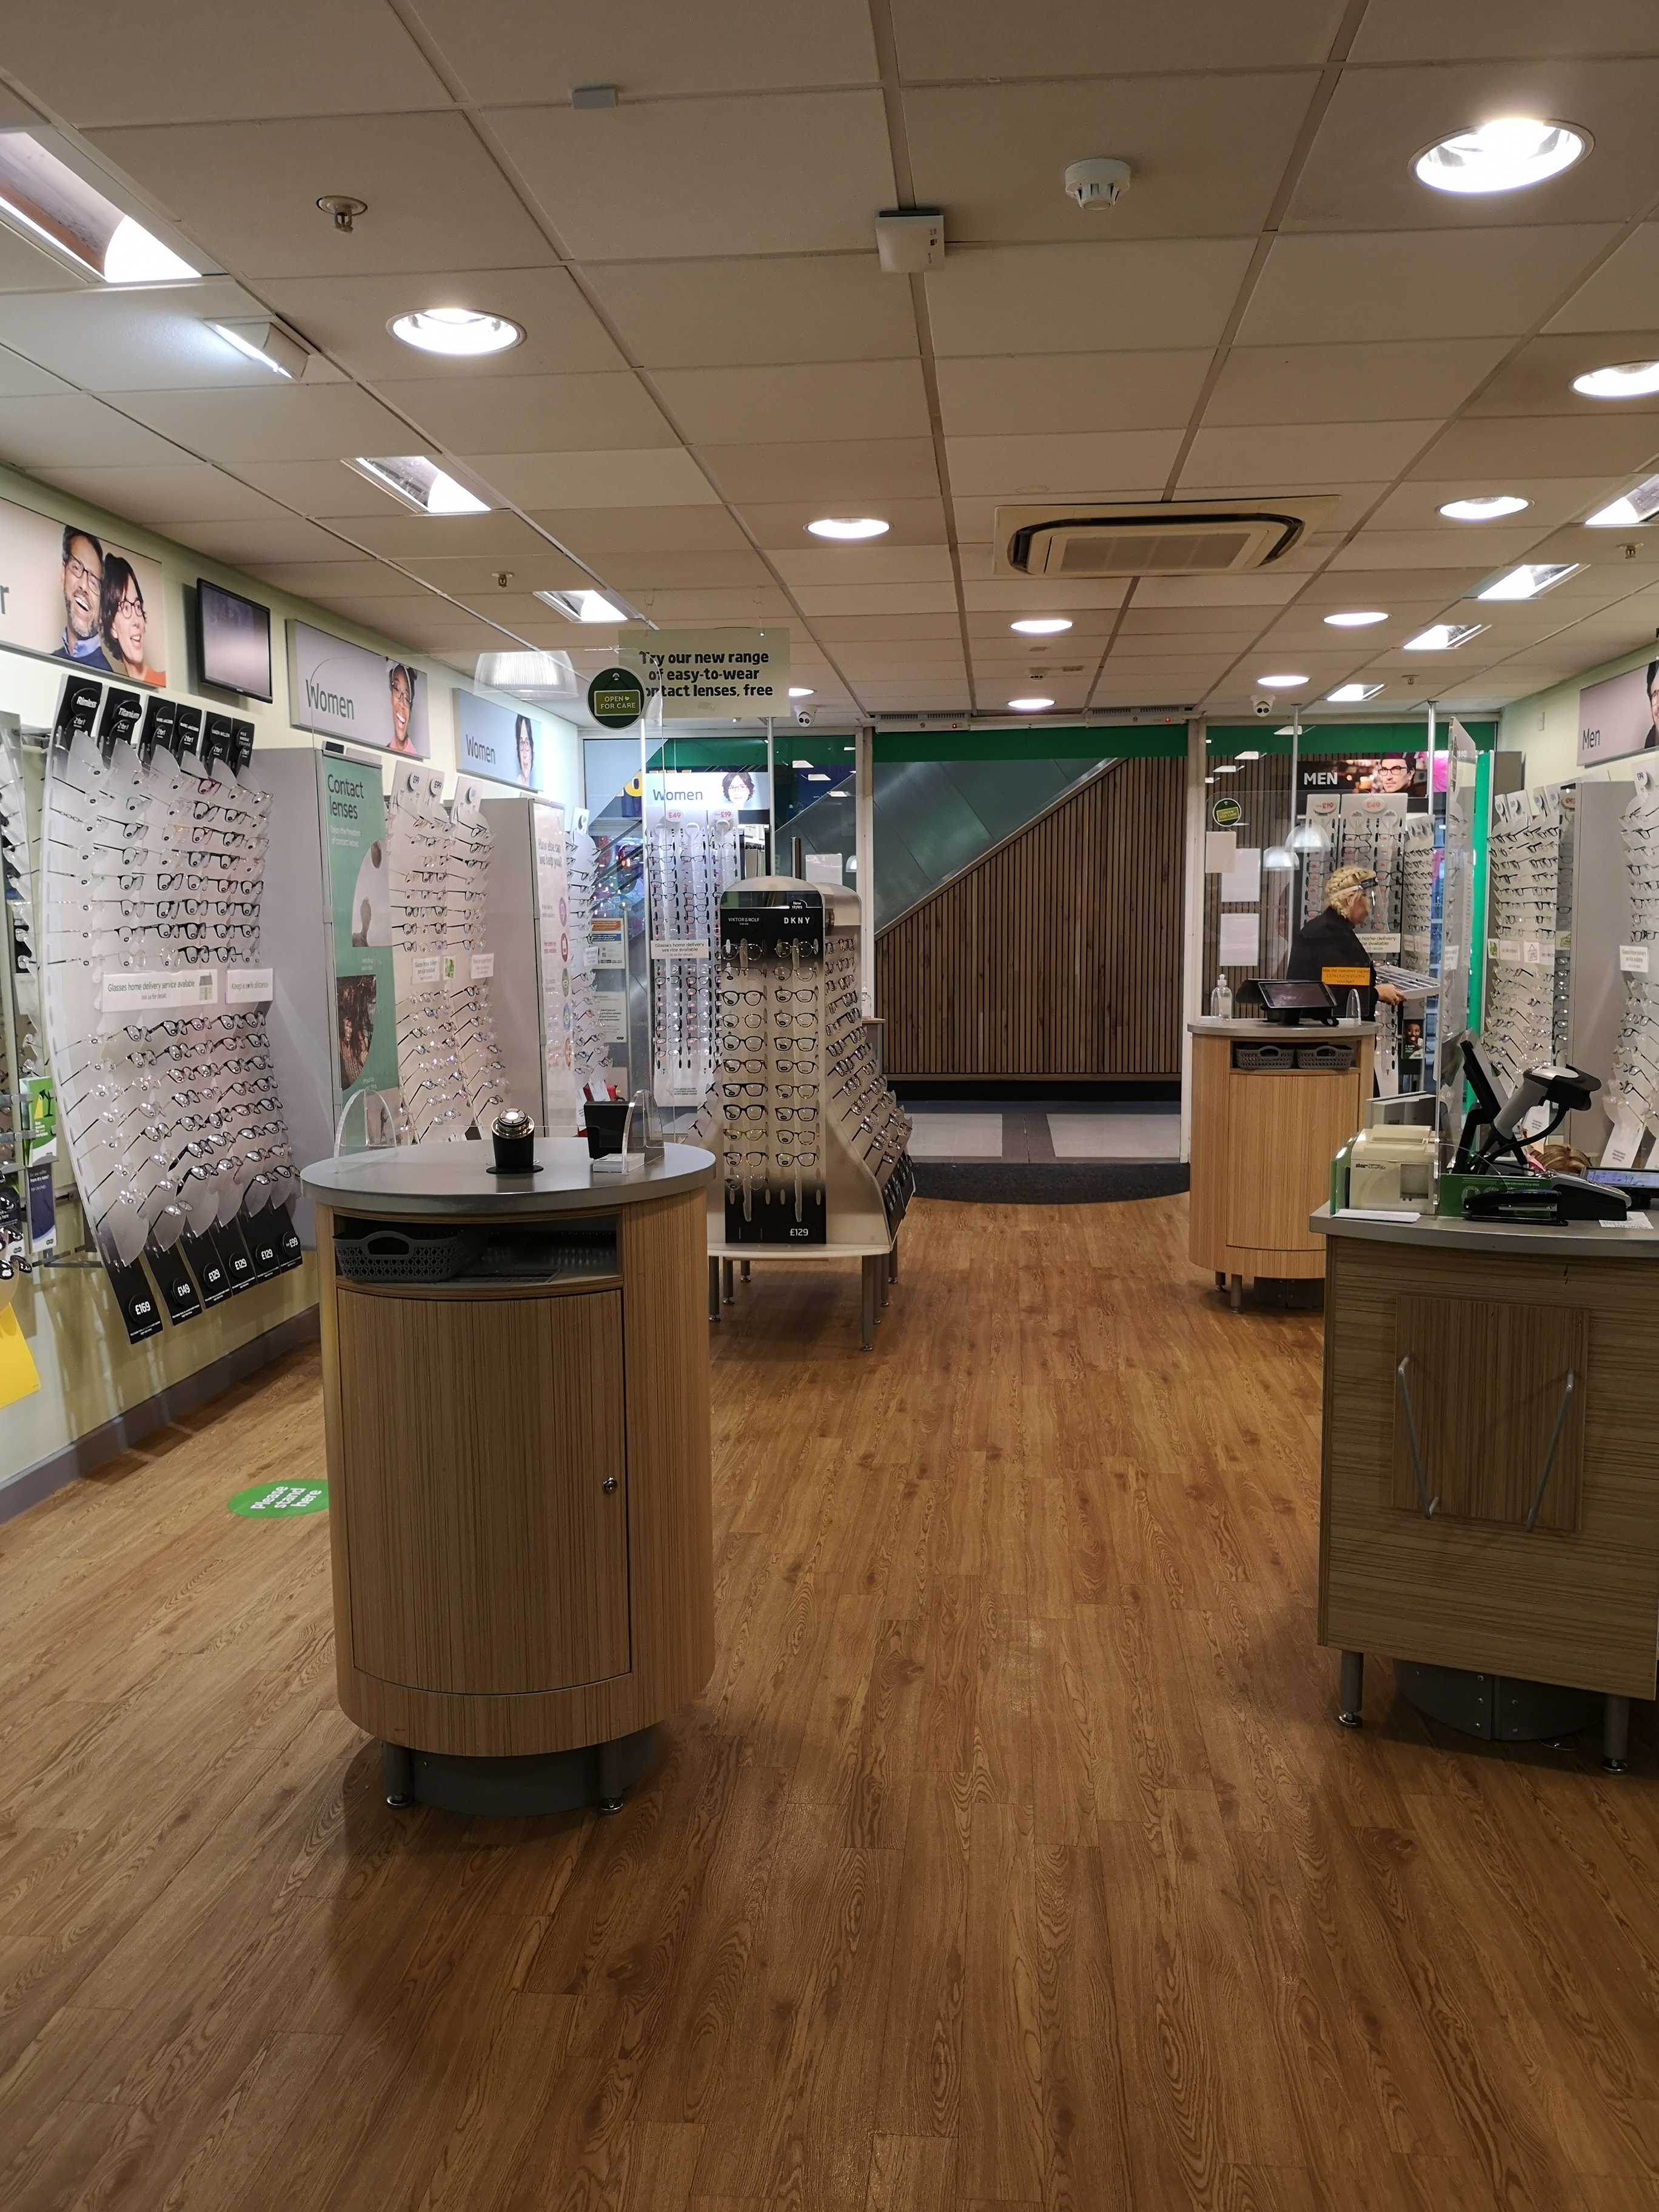 Images Specsavers Opticians and Audiologists - Middleton